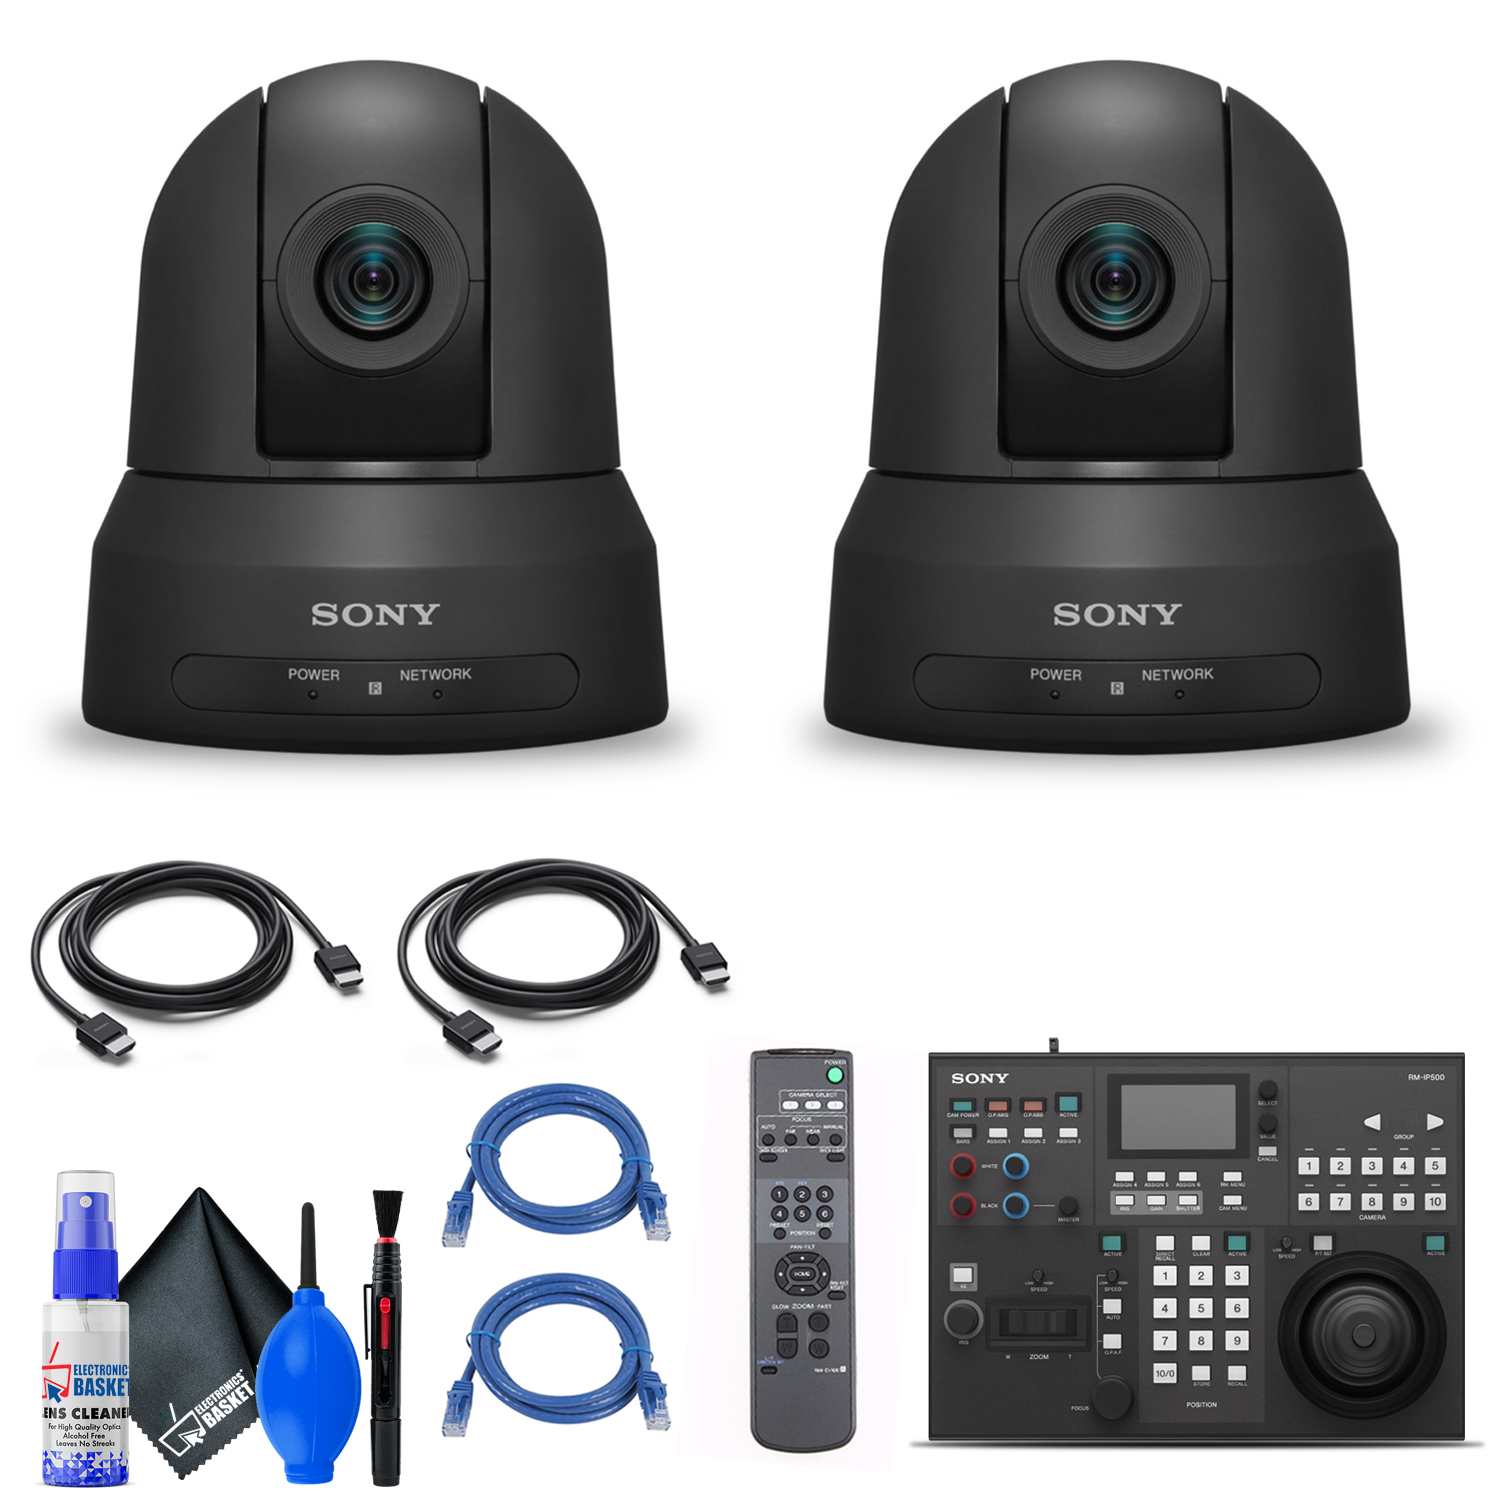 2 x Sony SRG-X400 1080p PTZ Camera with HDMI, IP & 3G-SDI Output (Black) (SRG-X400) + Sony RM-IP500/1 Remote Controller + 2 x Ethernet Cable + Cleaning Set + 2 x HDMI Cable - Bundle - image 1 of 3